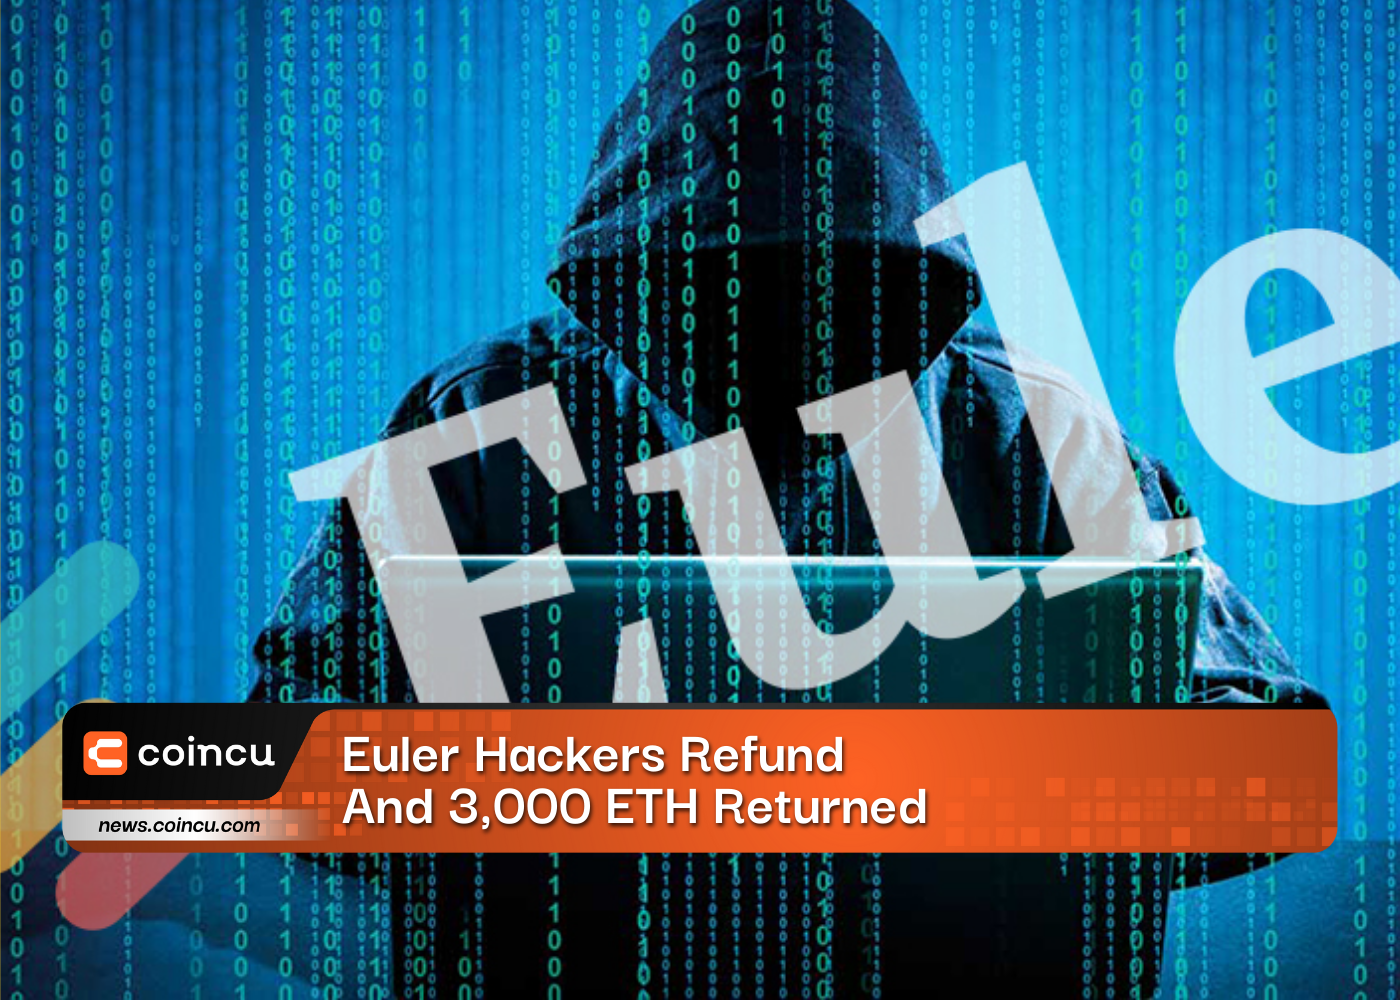 Euler Hackers Refund And 3,000 ETH Returned